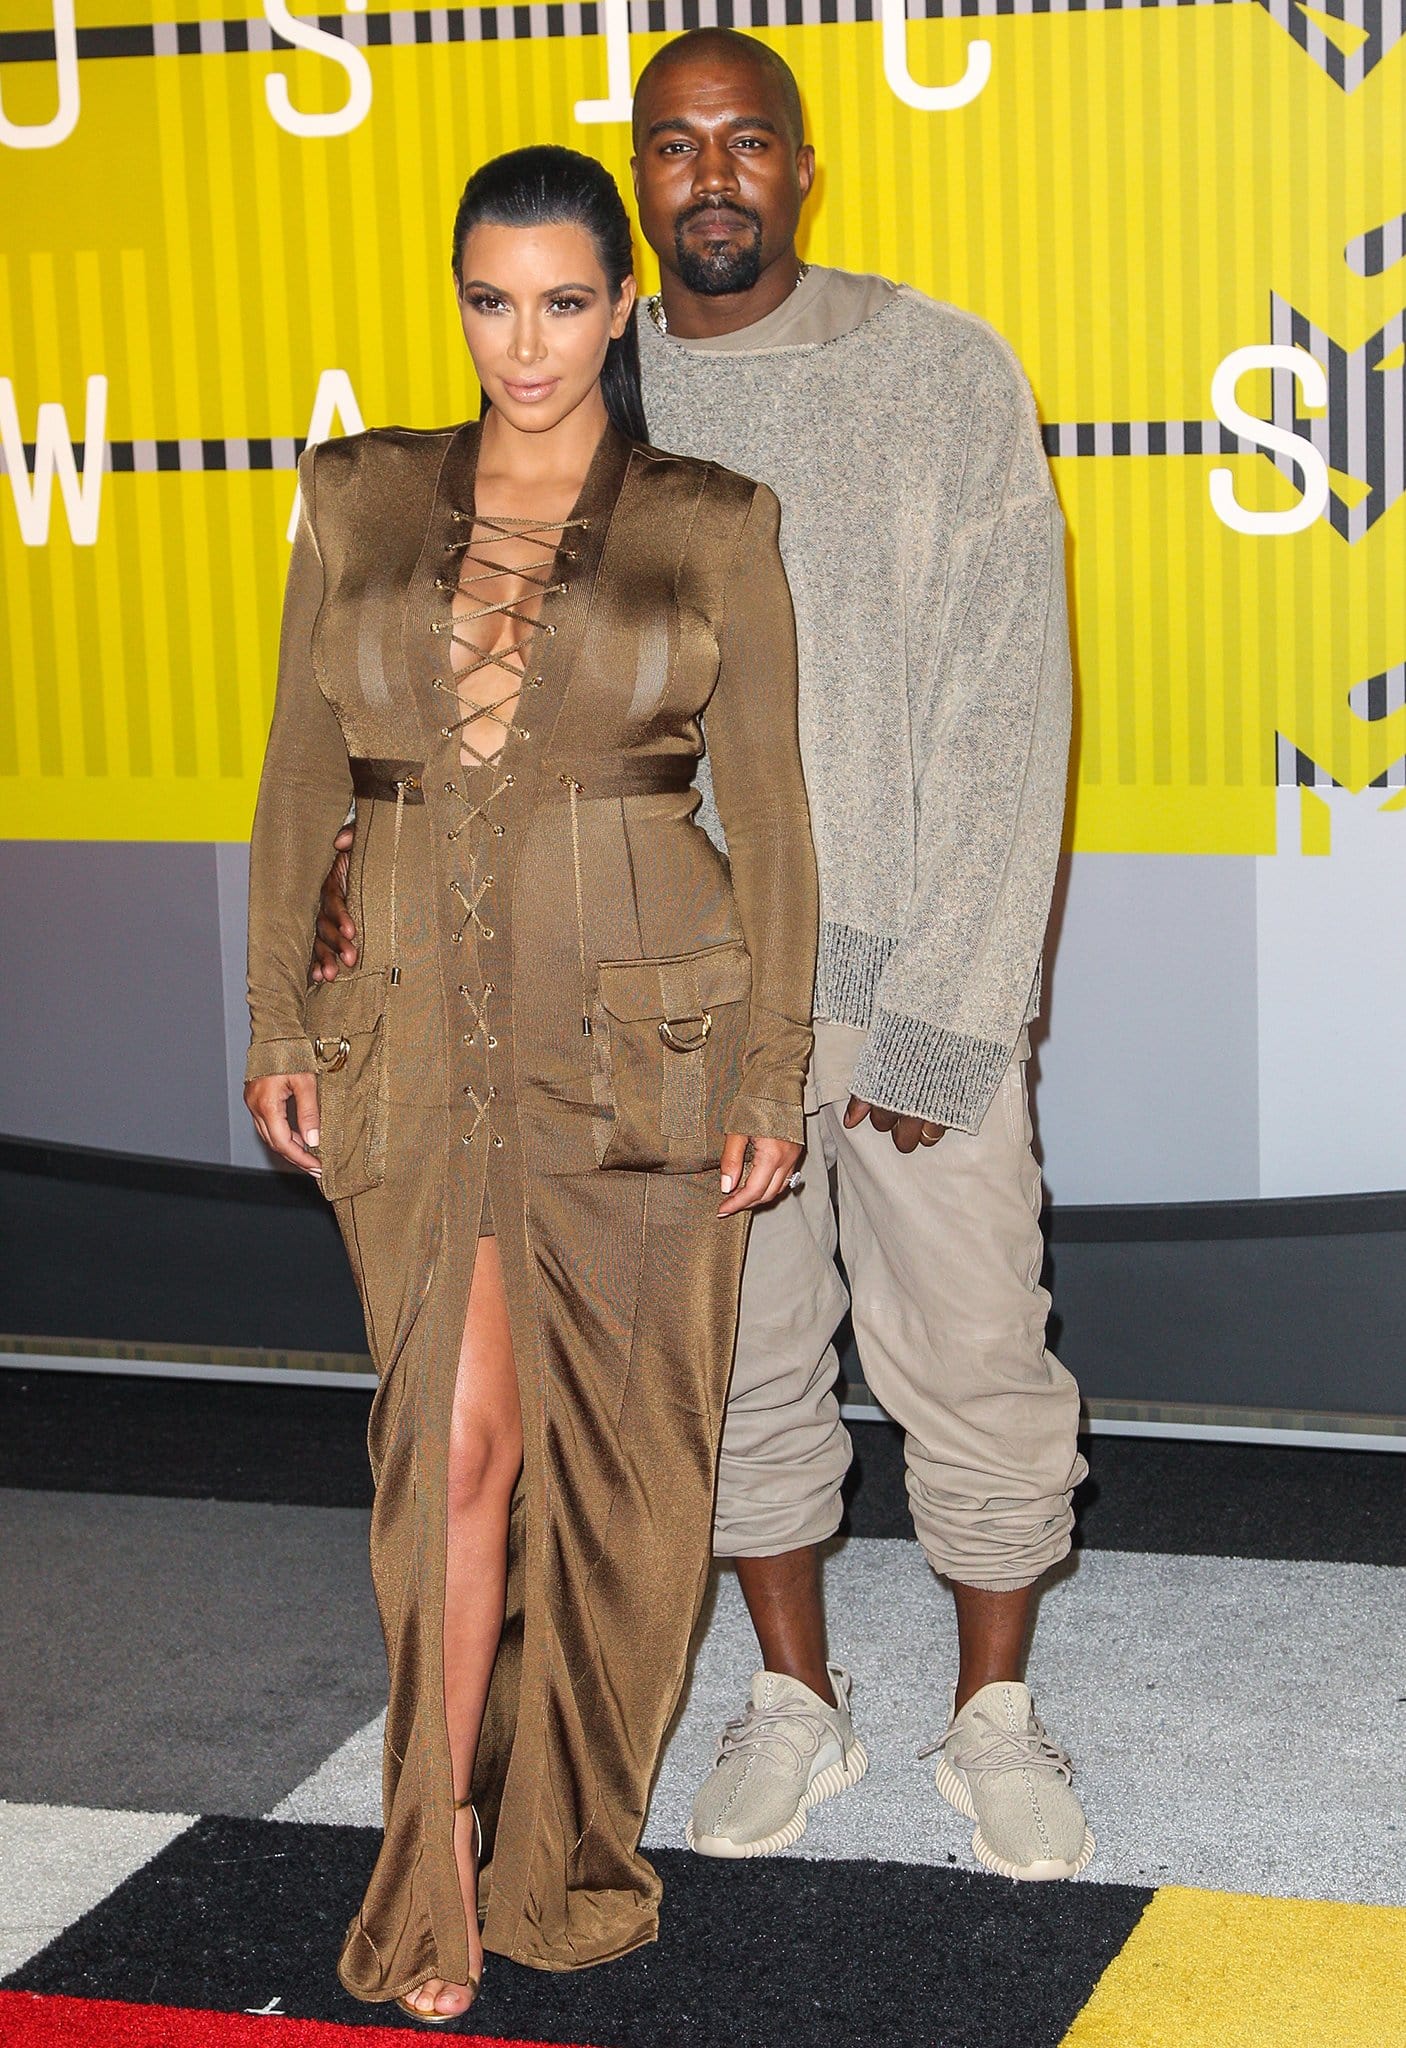 Kim Kardashian and Kanye West tied the knot in 2014 and divorced in 2022 after almost seven years of marriage